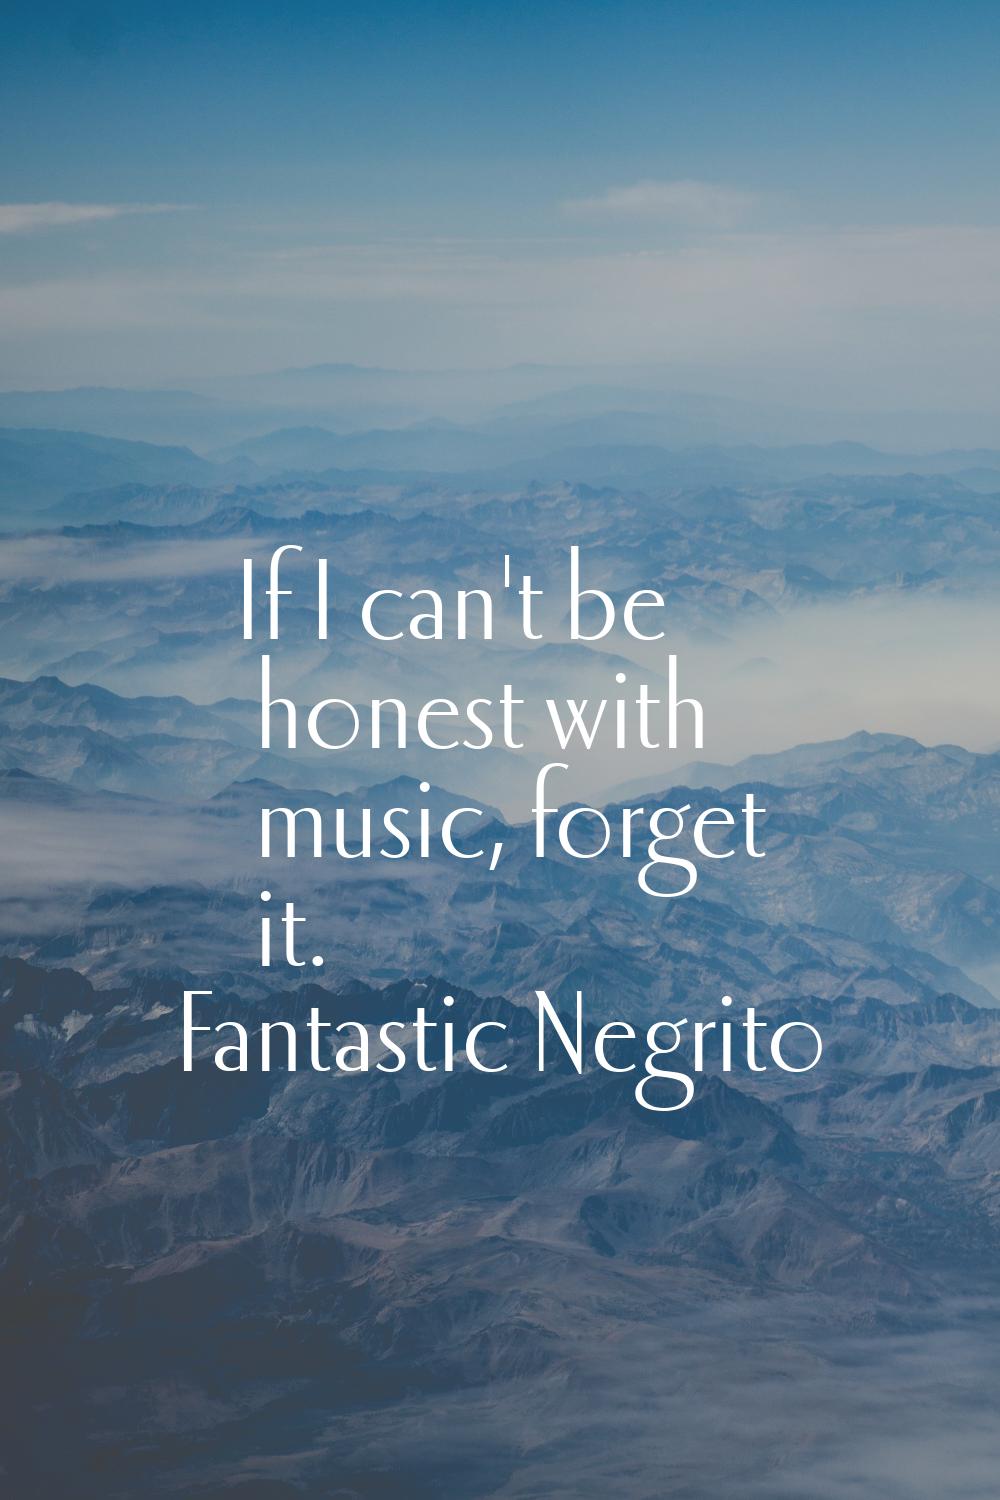 If I can't be honest with music, forget it.